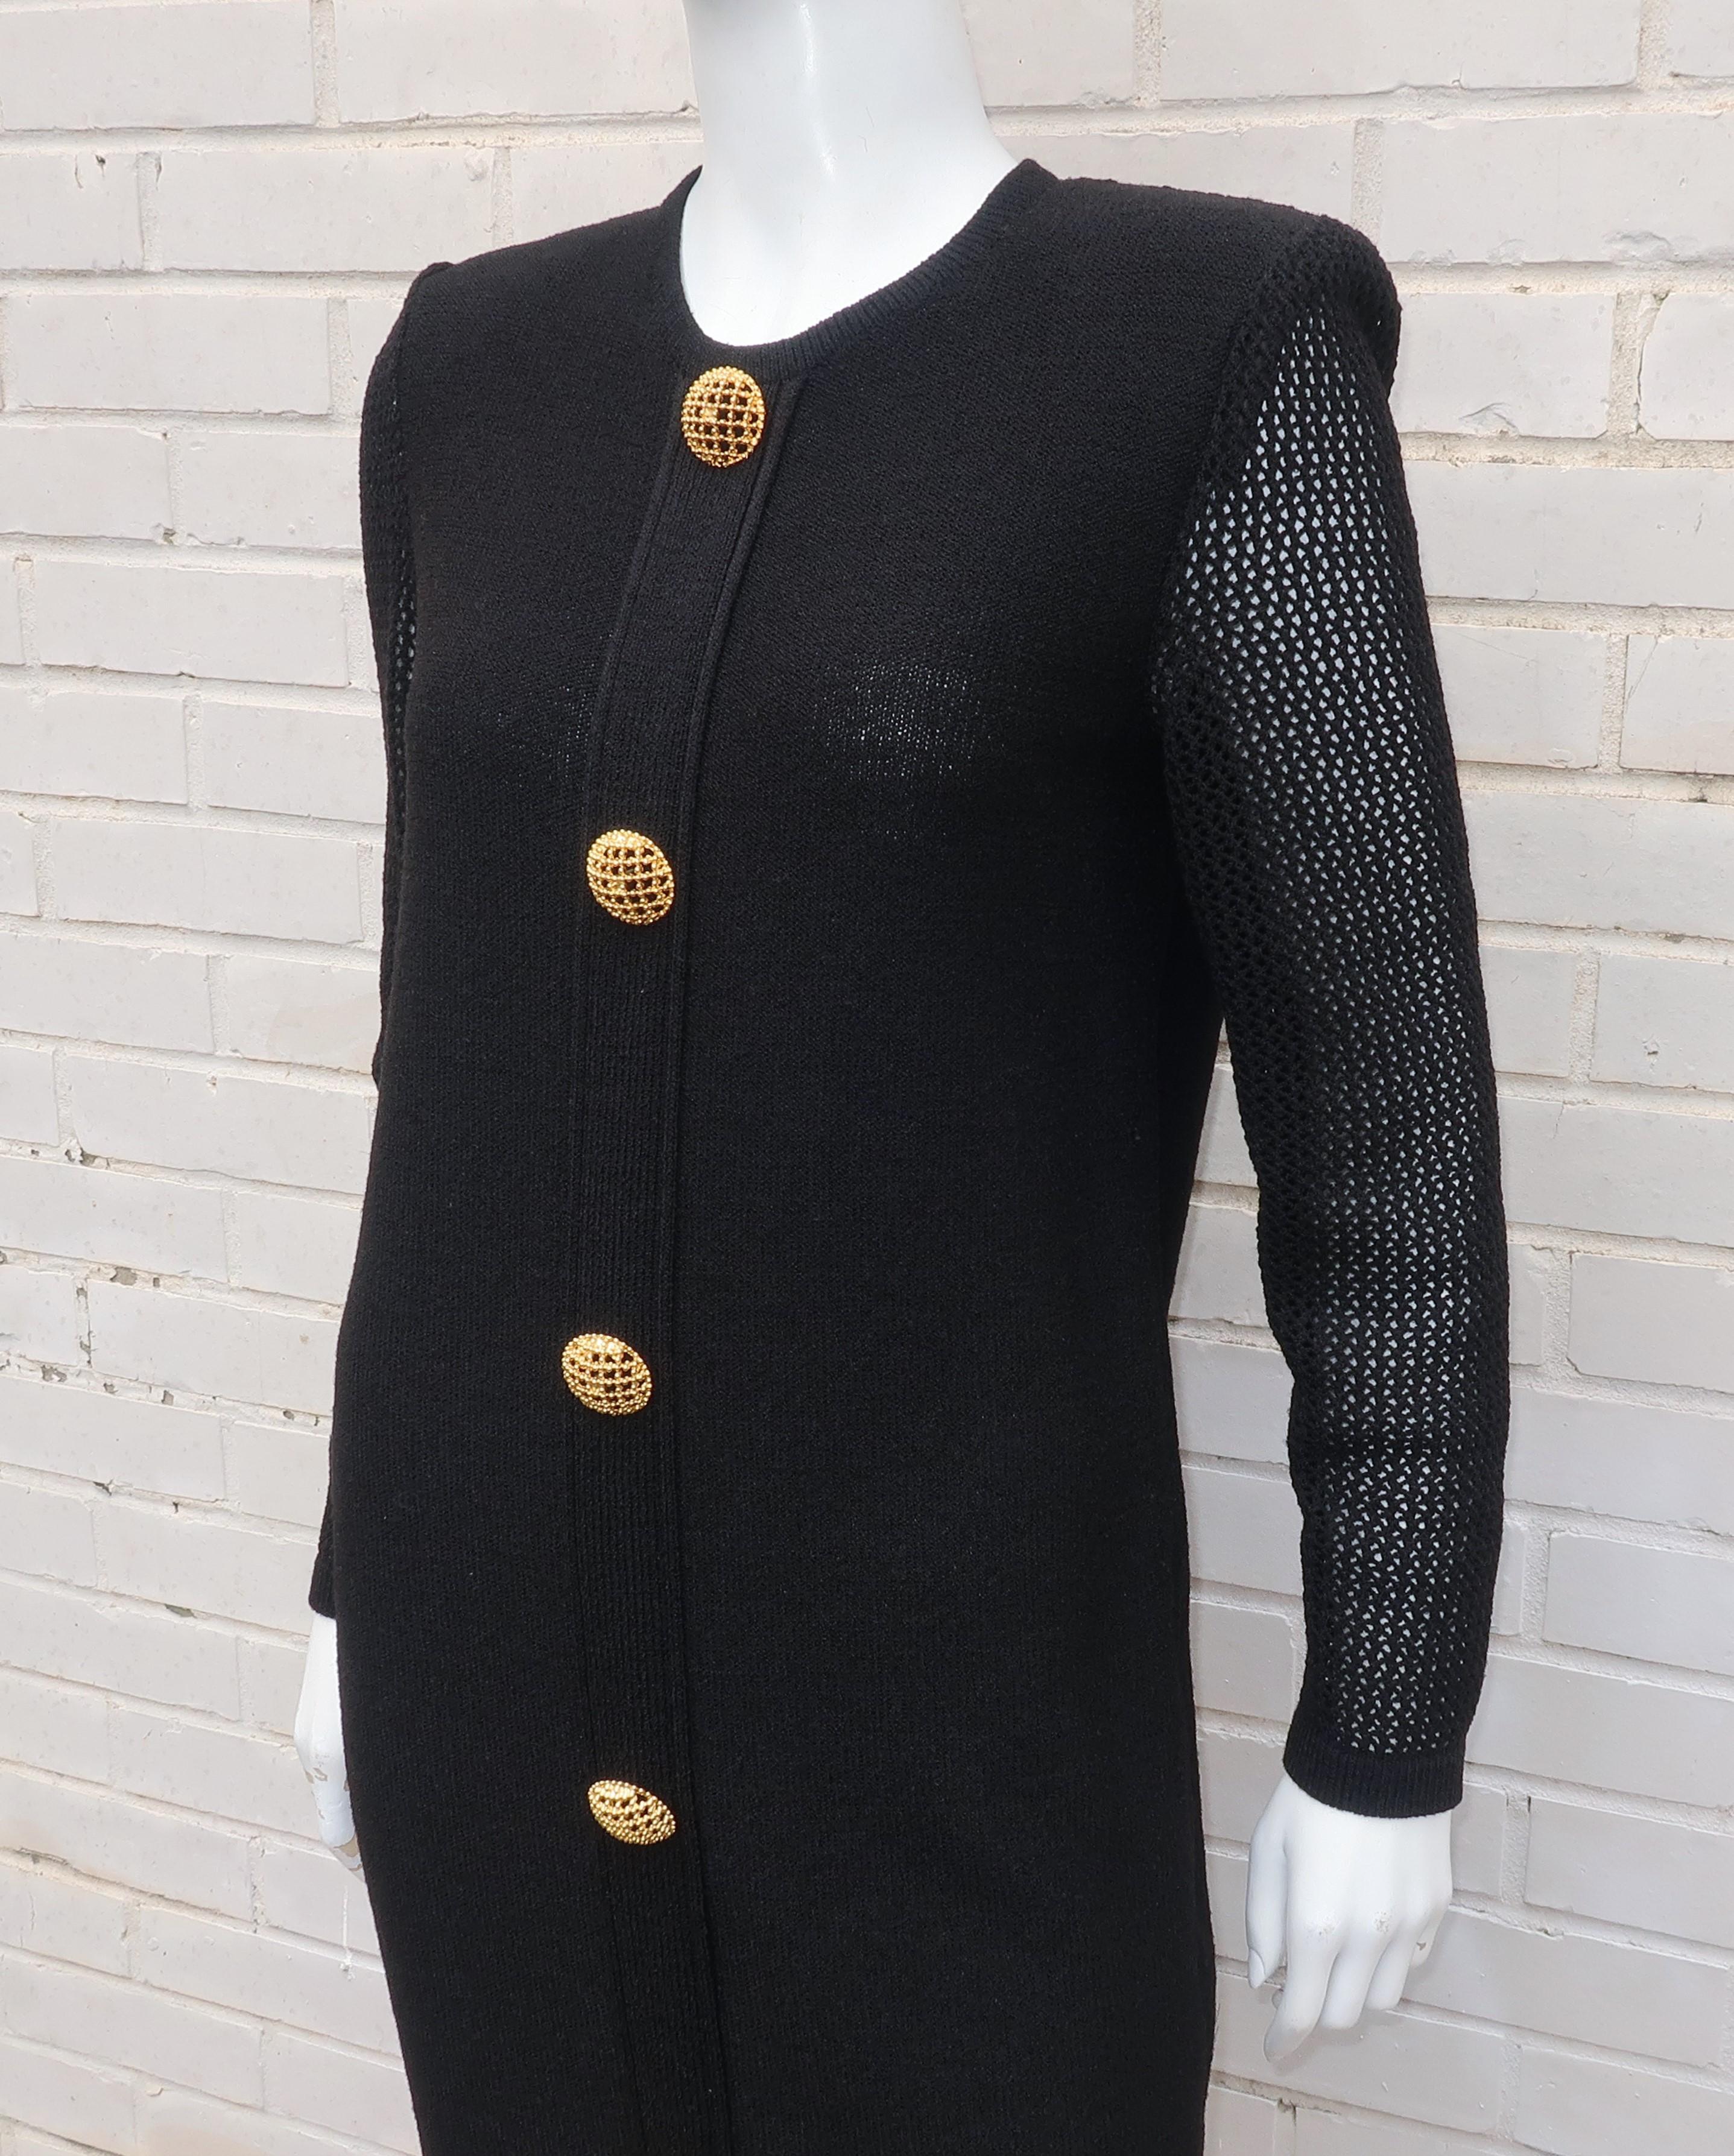 Scaasi 1980's Black Knit Dress With Large Gold Buttons 4